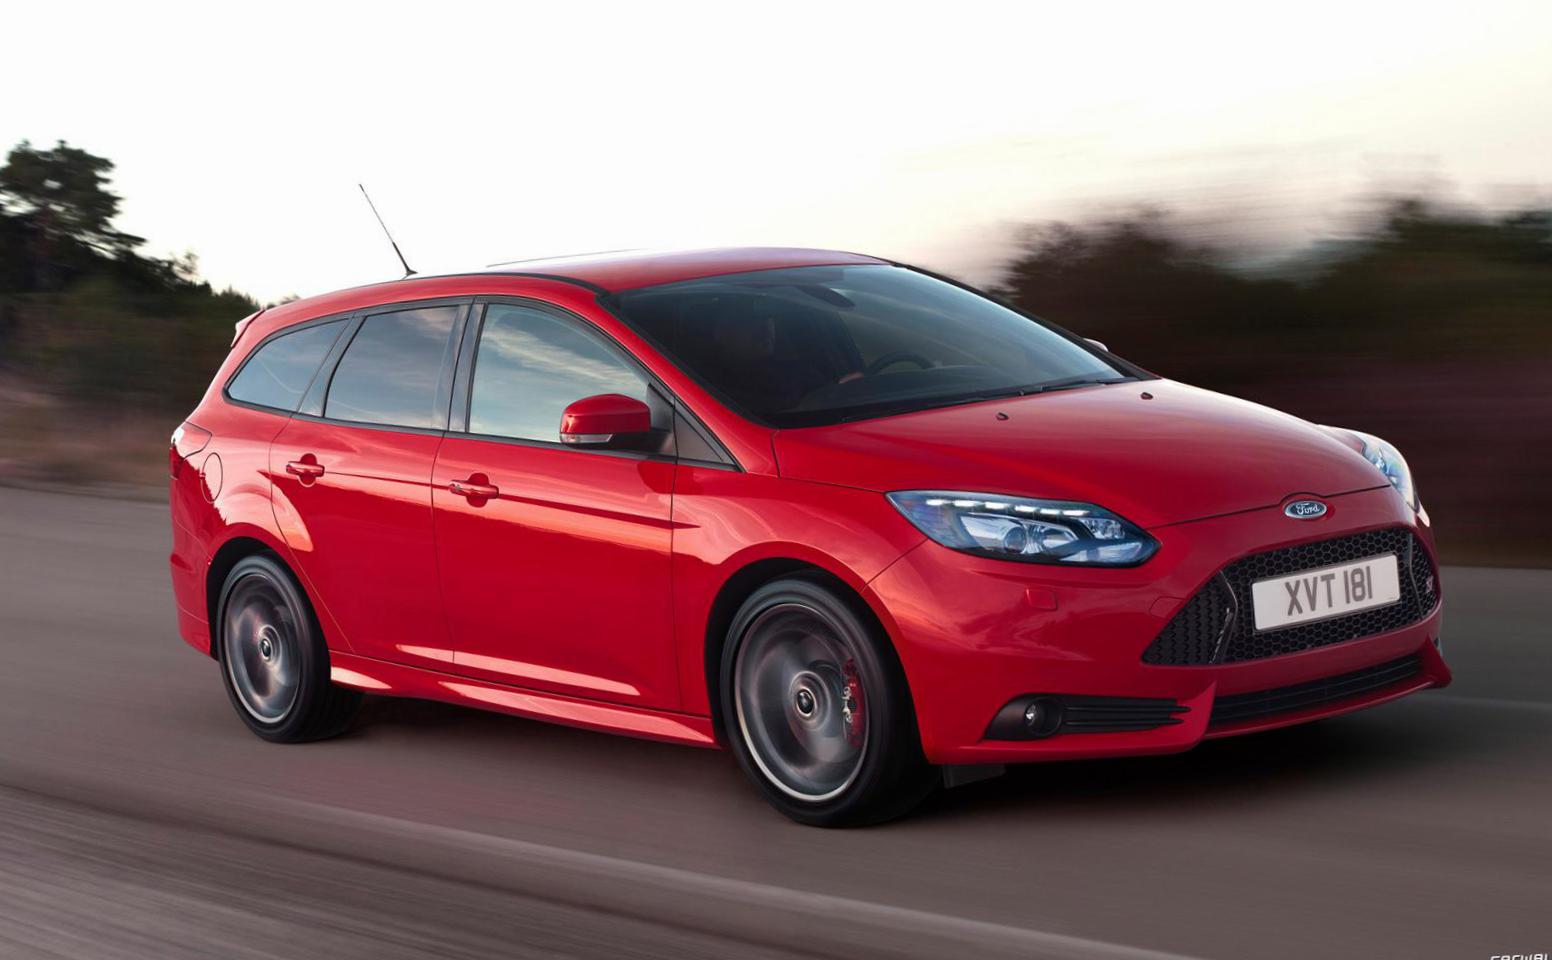 Focus Wagon Ford used 2013